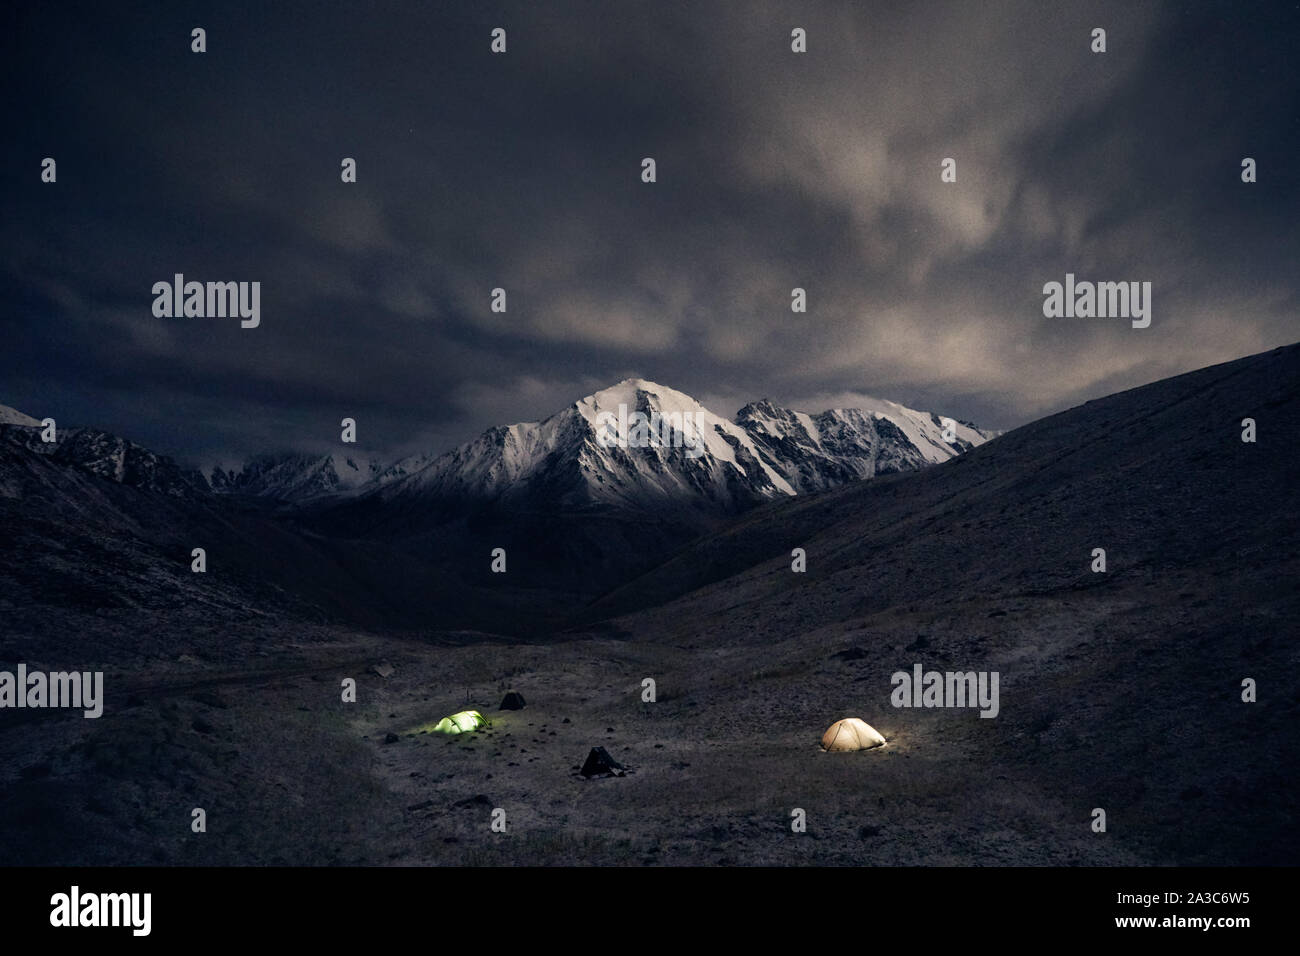 Dramatic landscape of mountain range at night with camping from tents with light at dark cloudy sky background Stock Photo